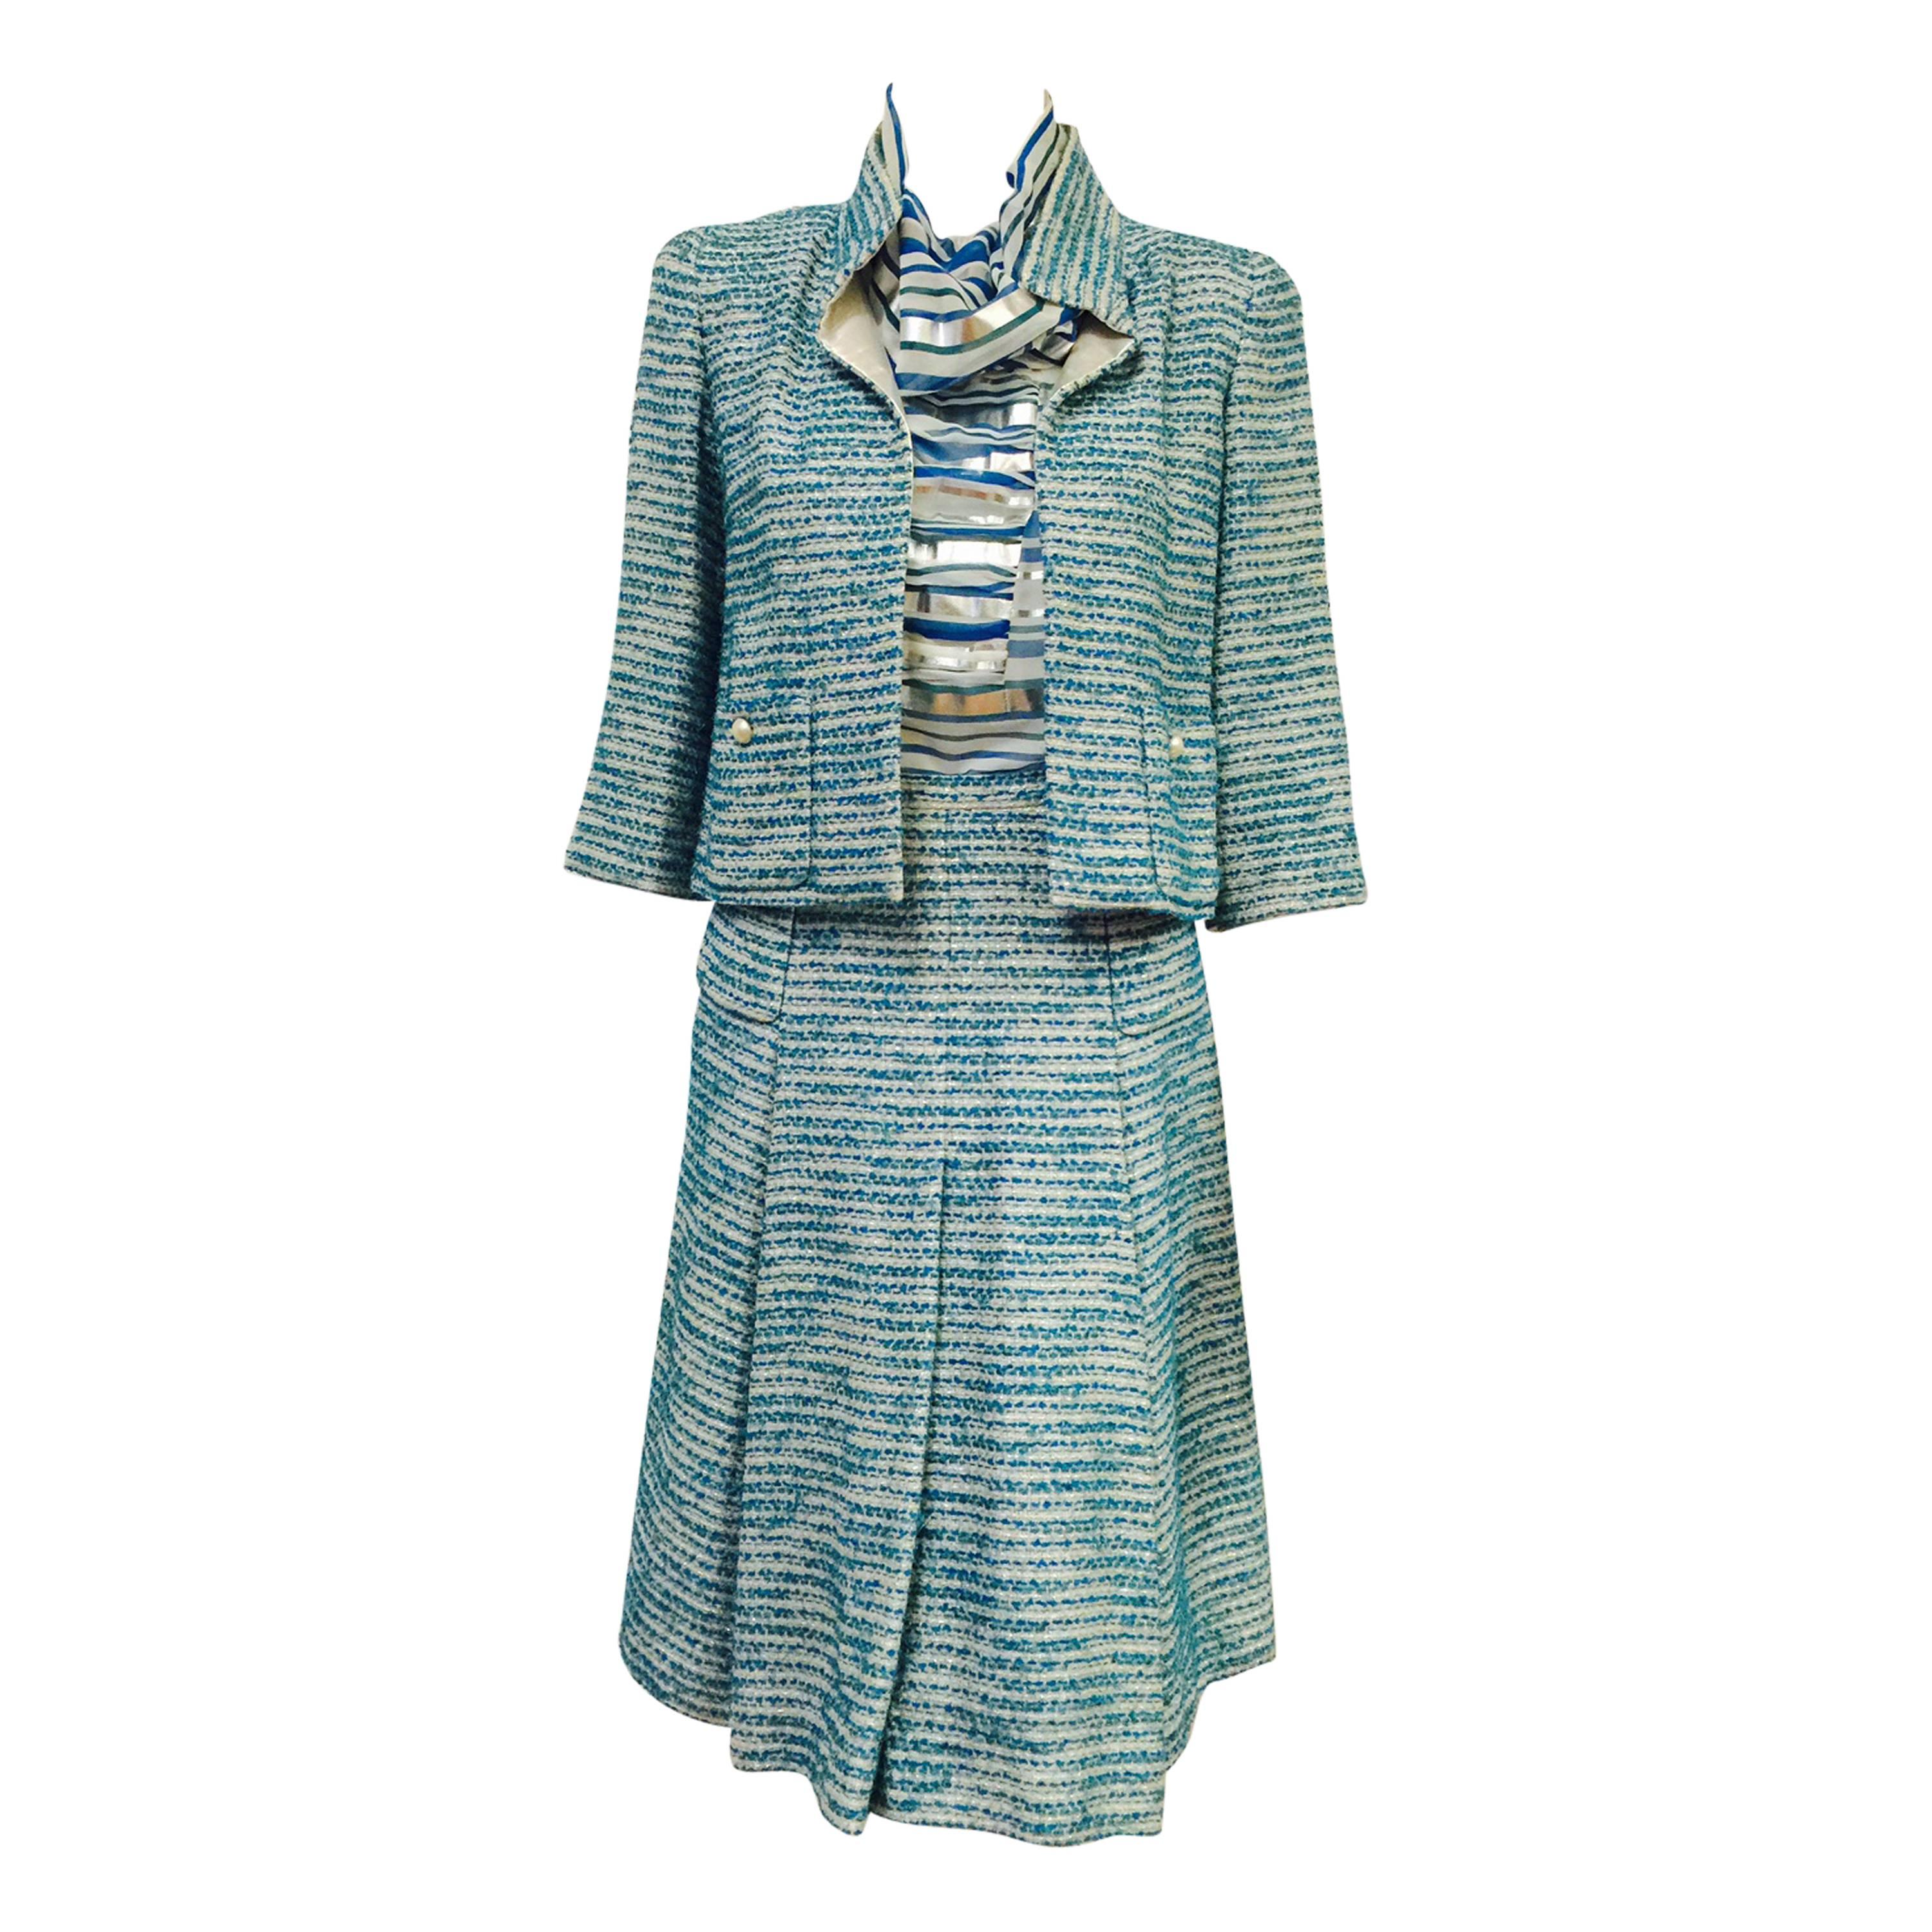 Chanel Spring 2001 Teal and Metallic Silver Tweed 3-Piece Ensemble  